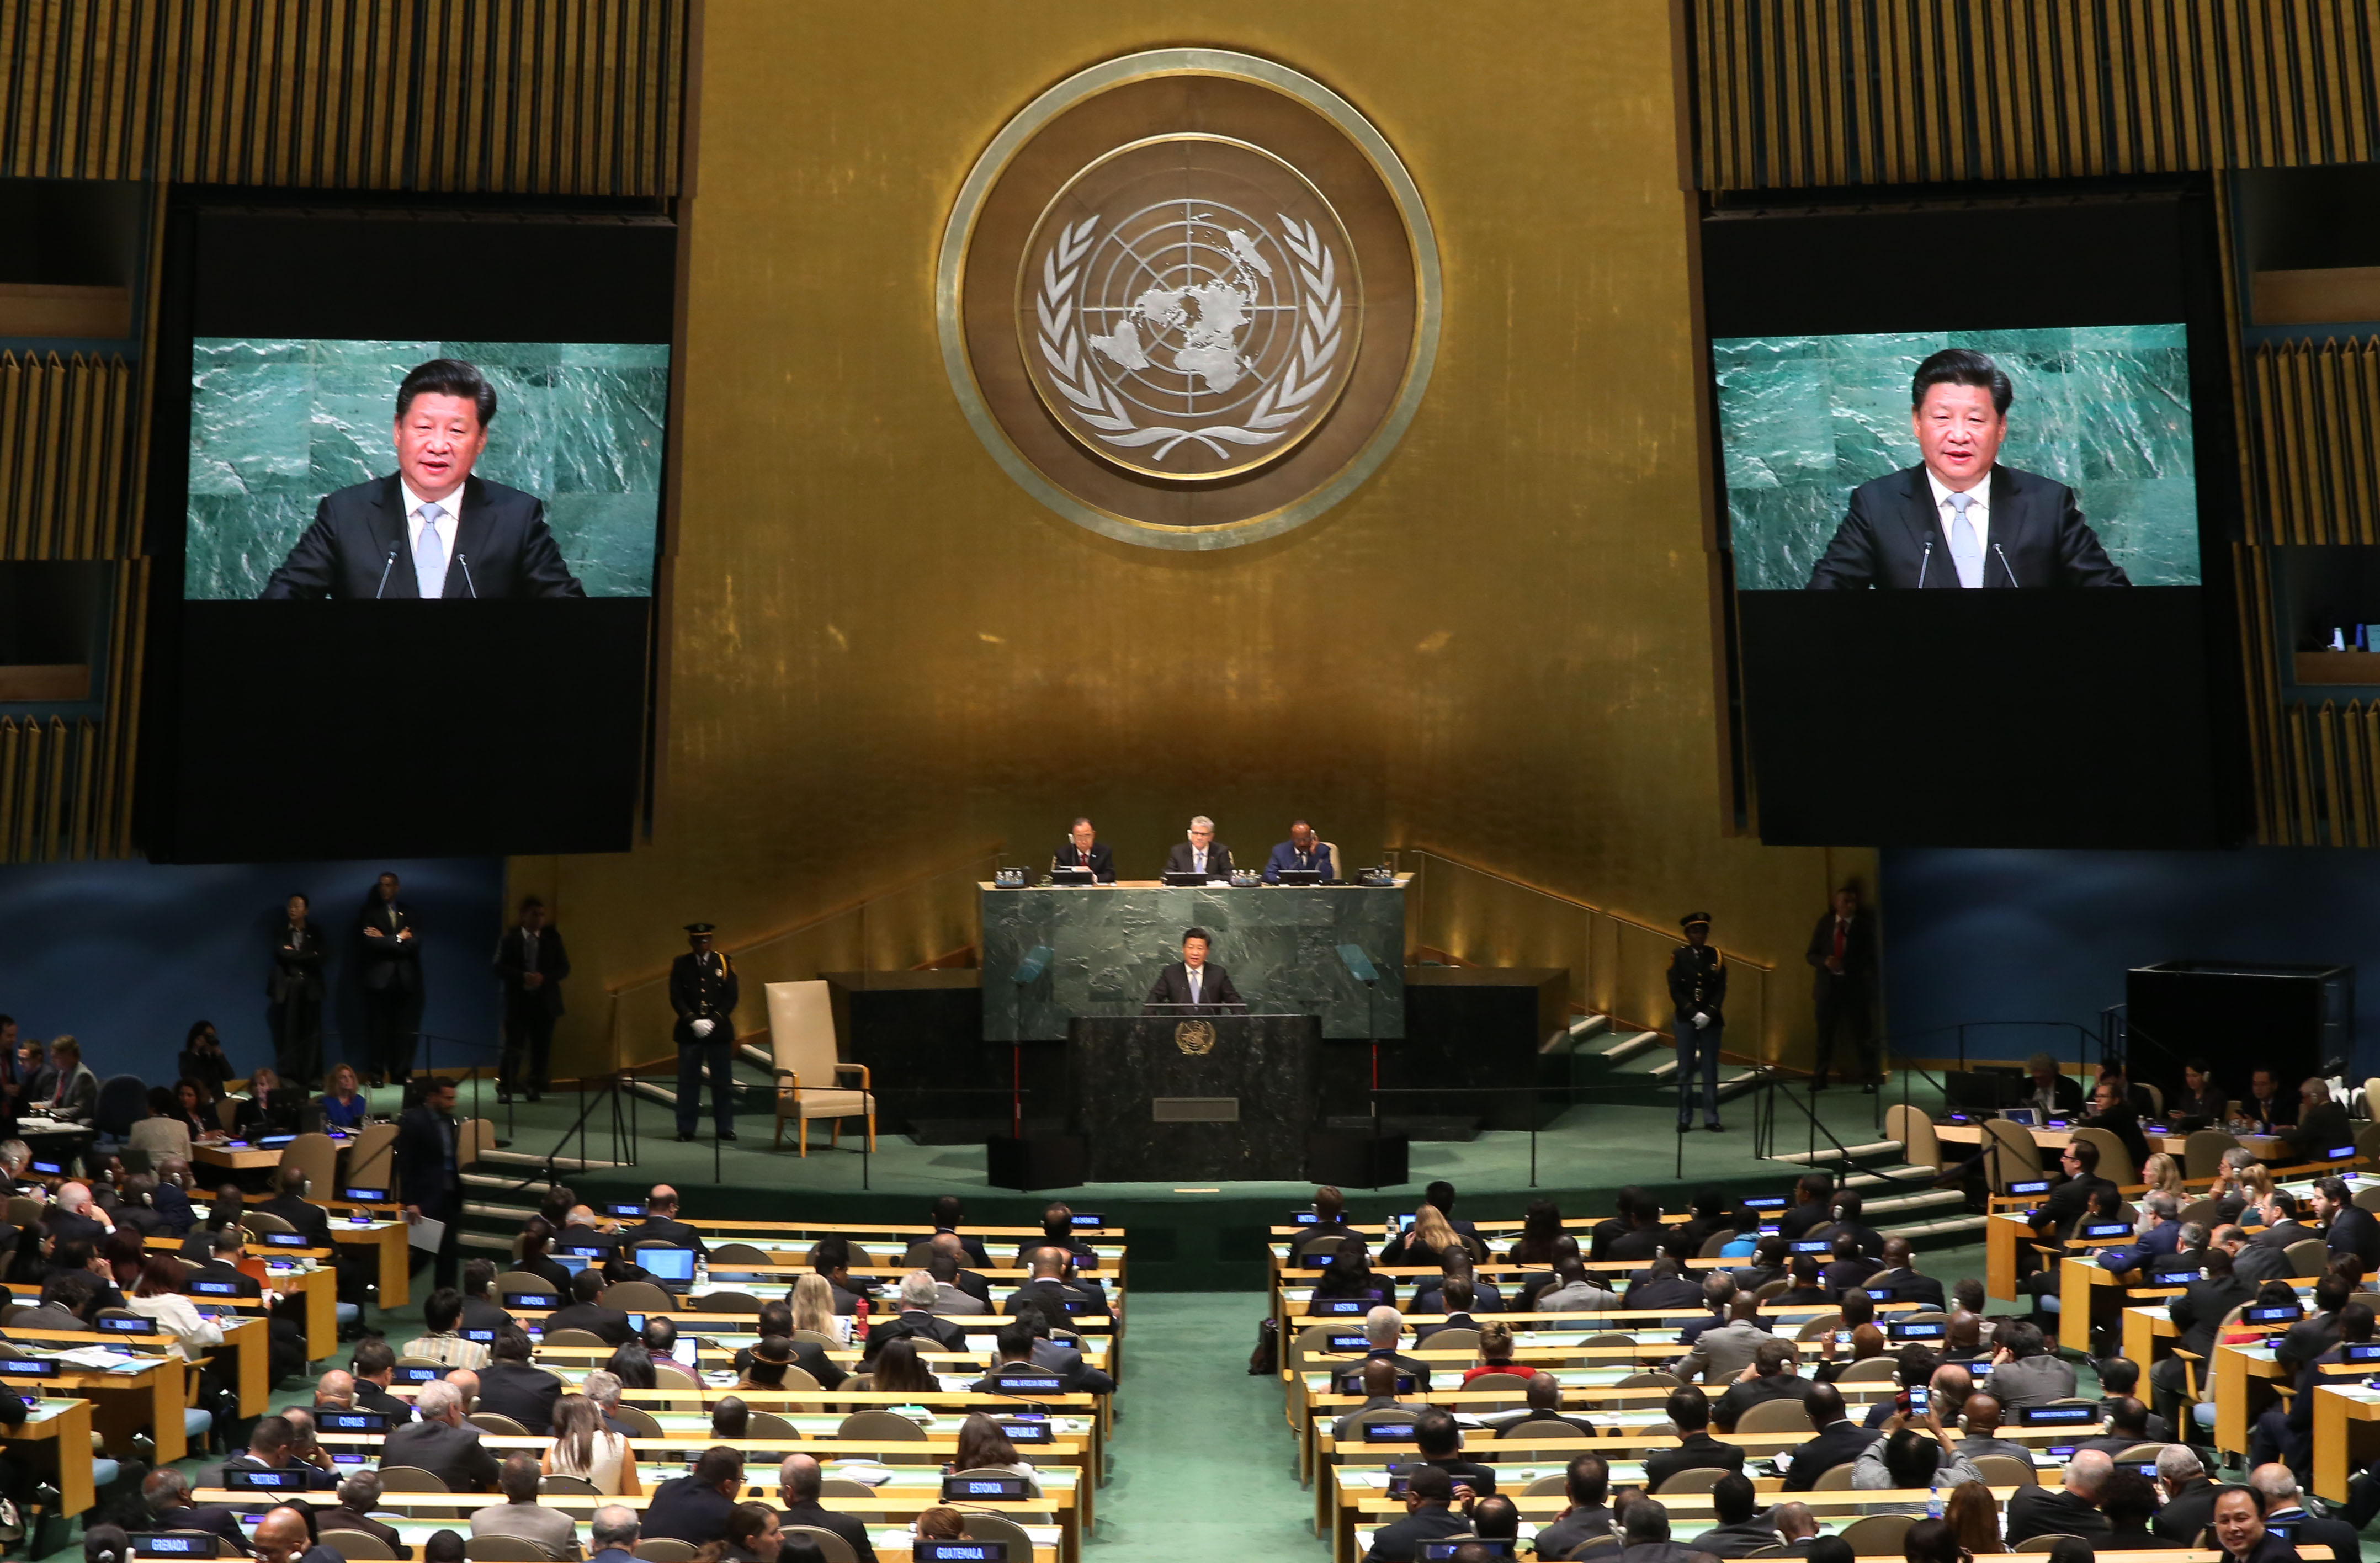 President Xi Jinping addresses the UN General Assembly in New York. Photo: Xinhua